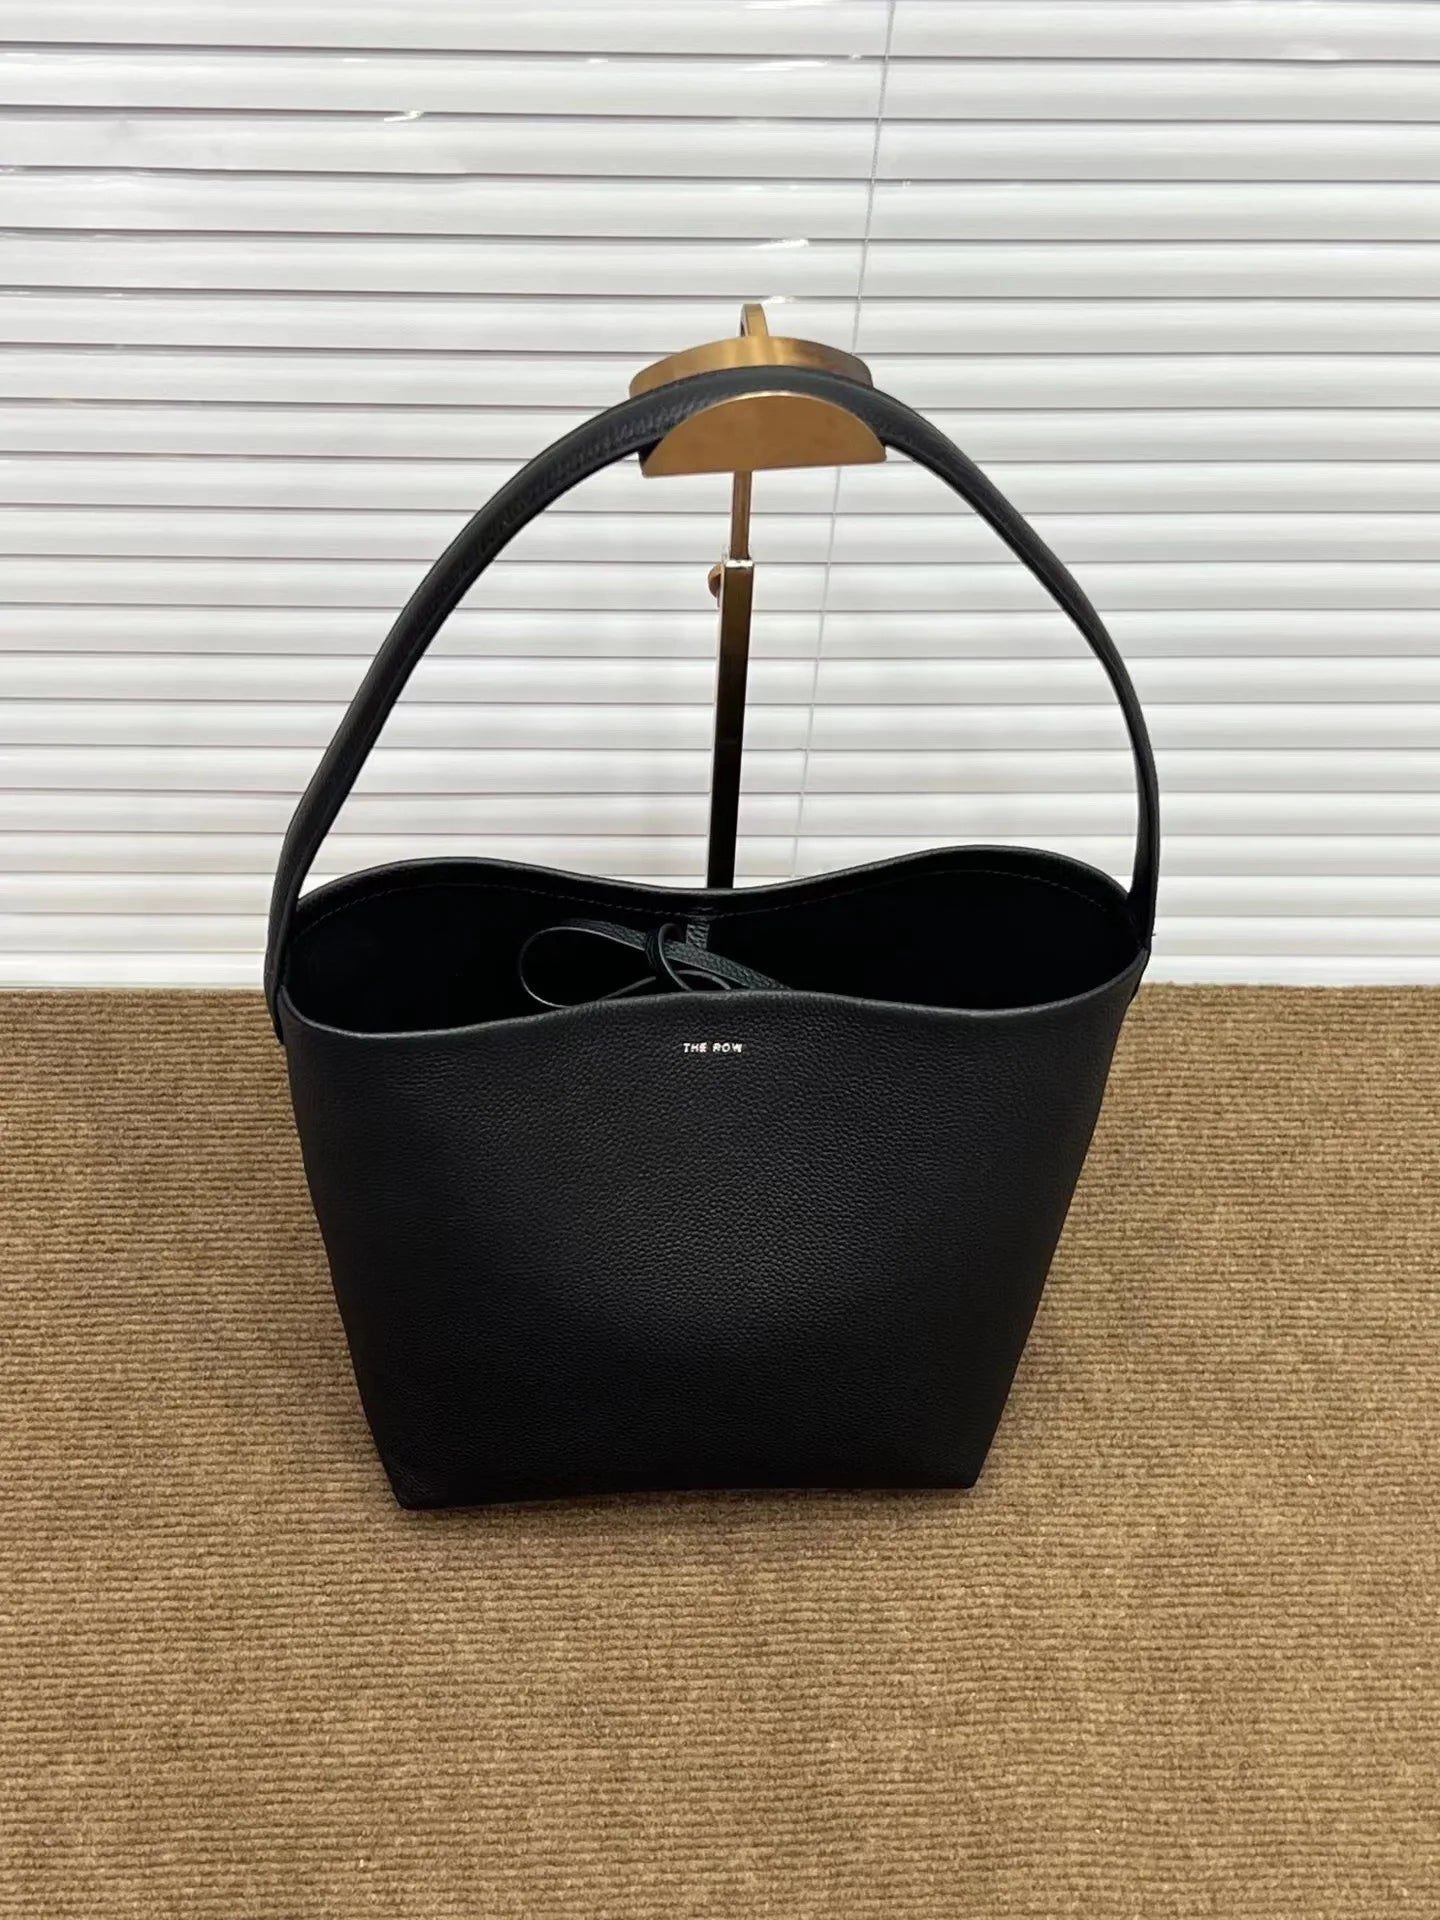 Top Layer Cowhide Leather The New Cowhide Single High Capacity Shoulder Bags For Women Handbag Row Black Bucket Winter Tote Bags